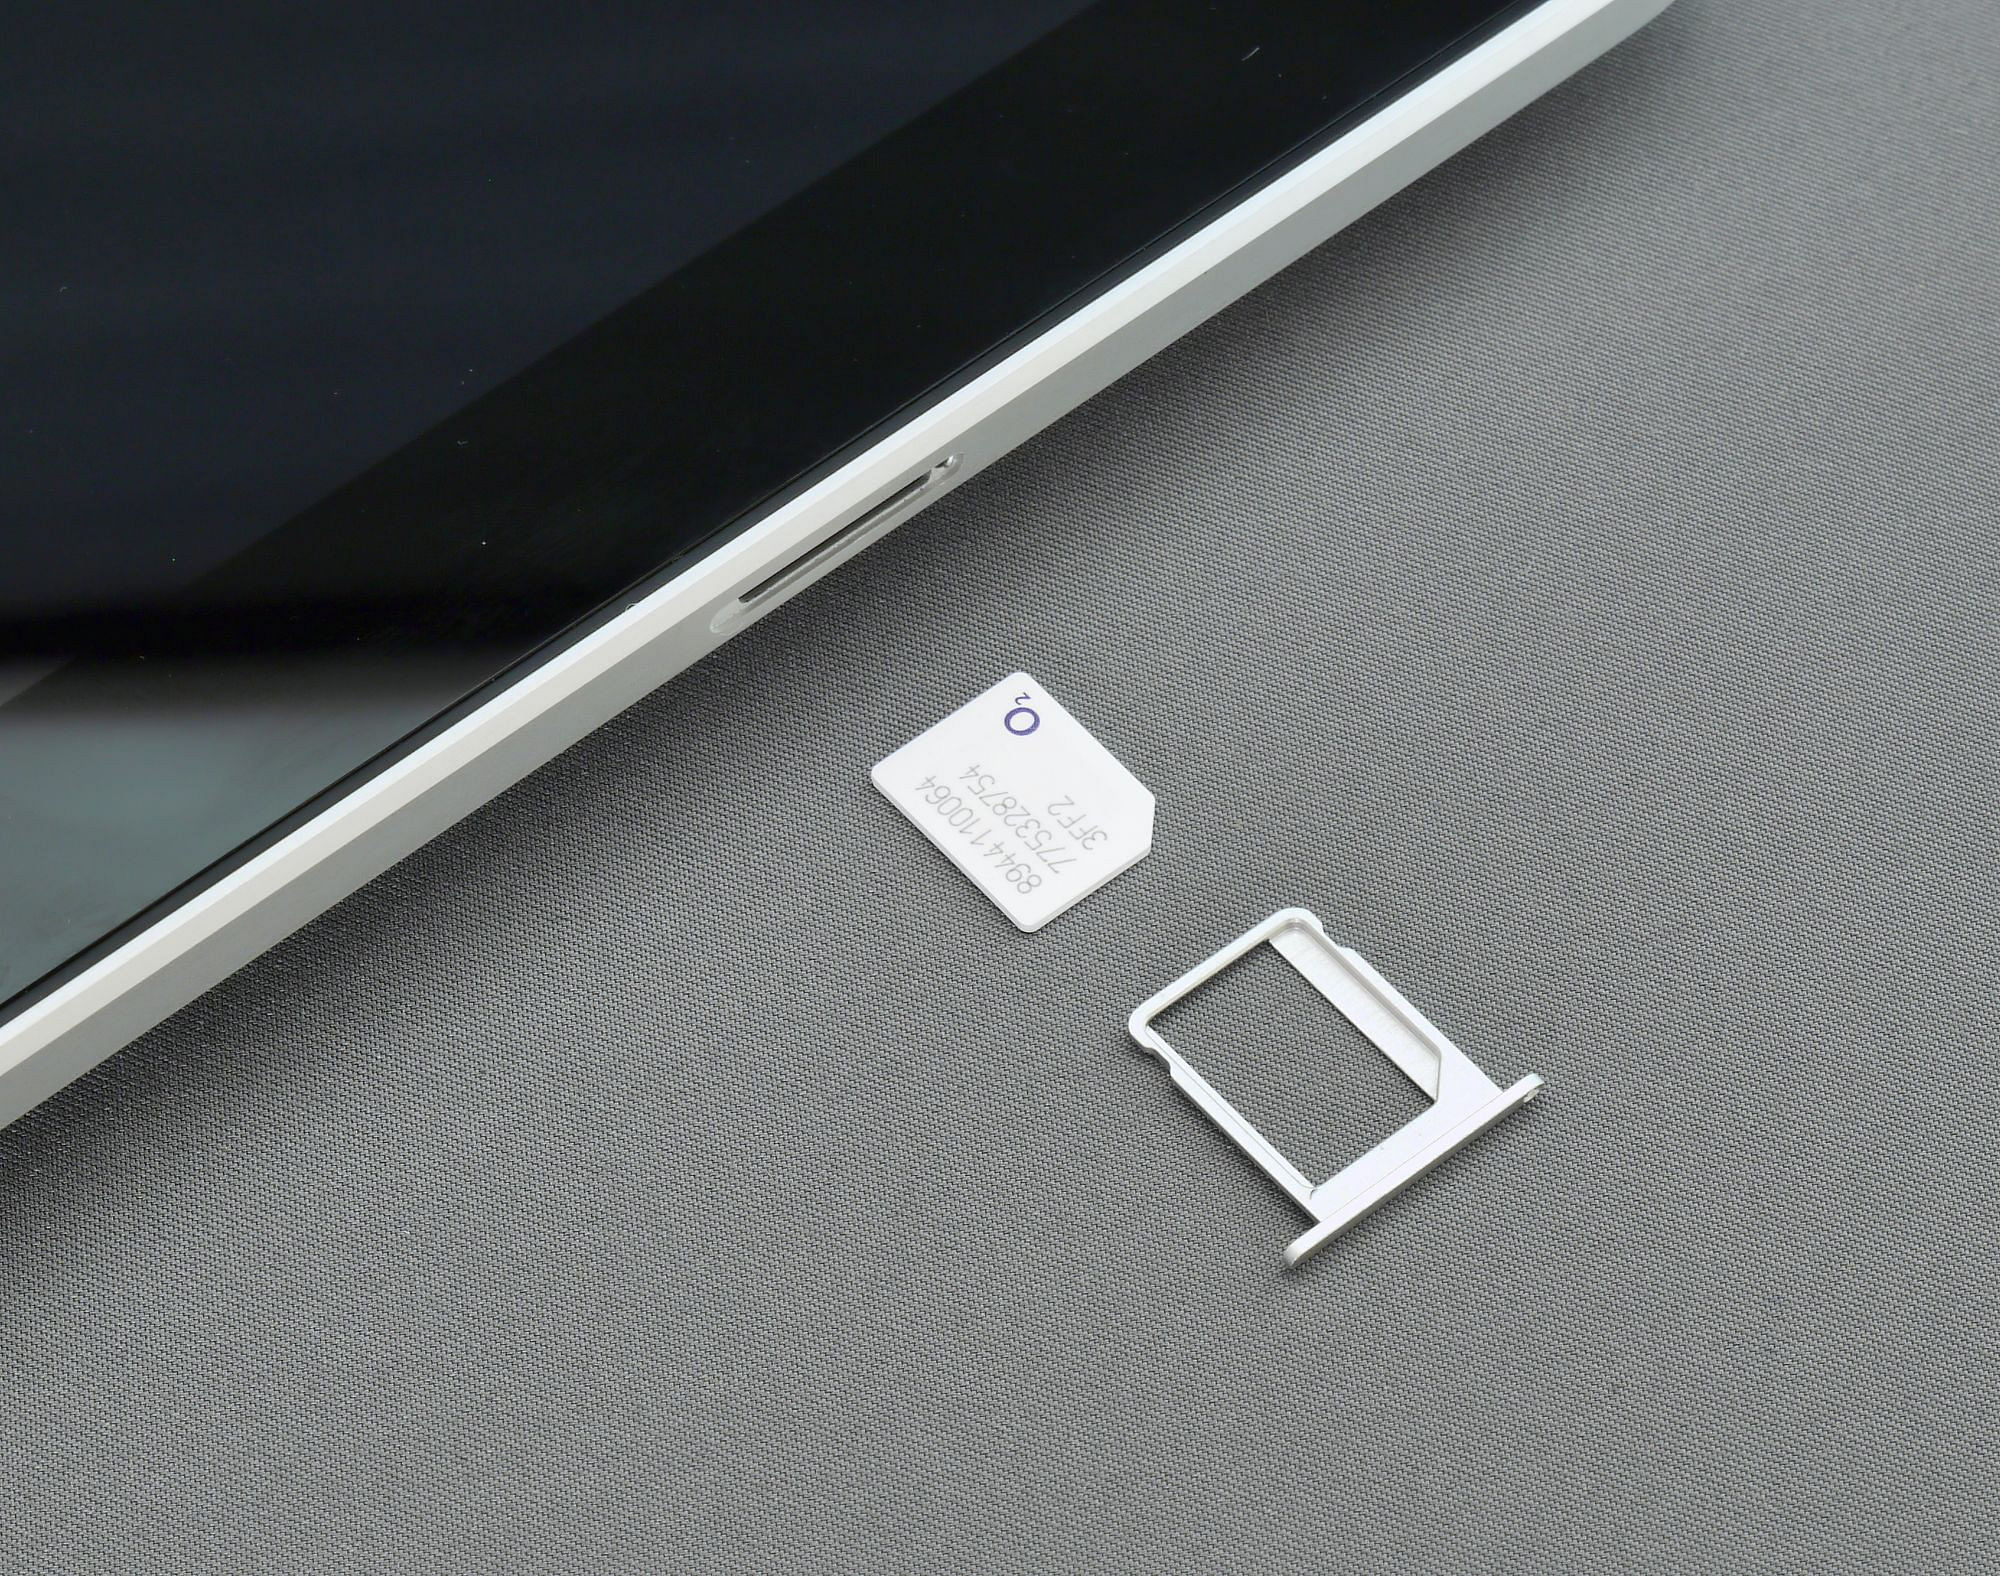 How to remove the SIM card on your iPhone